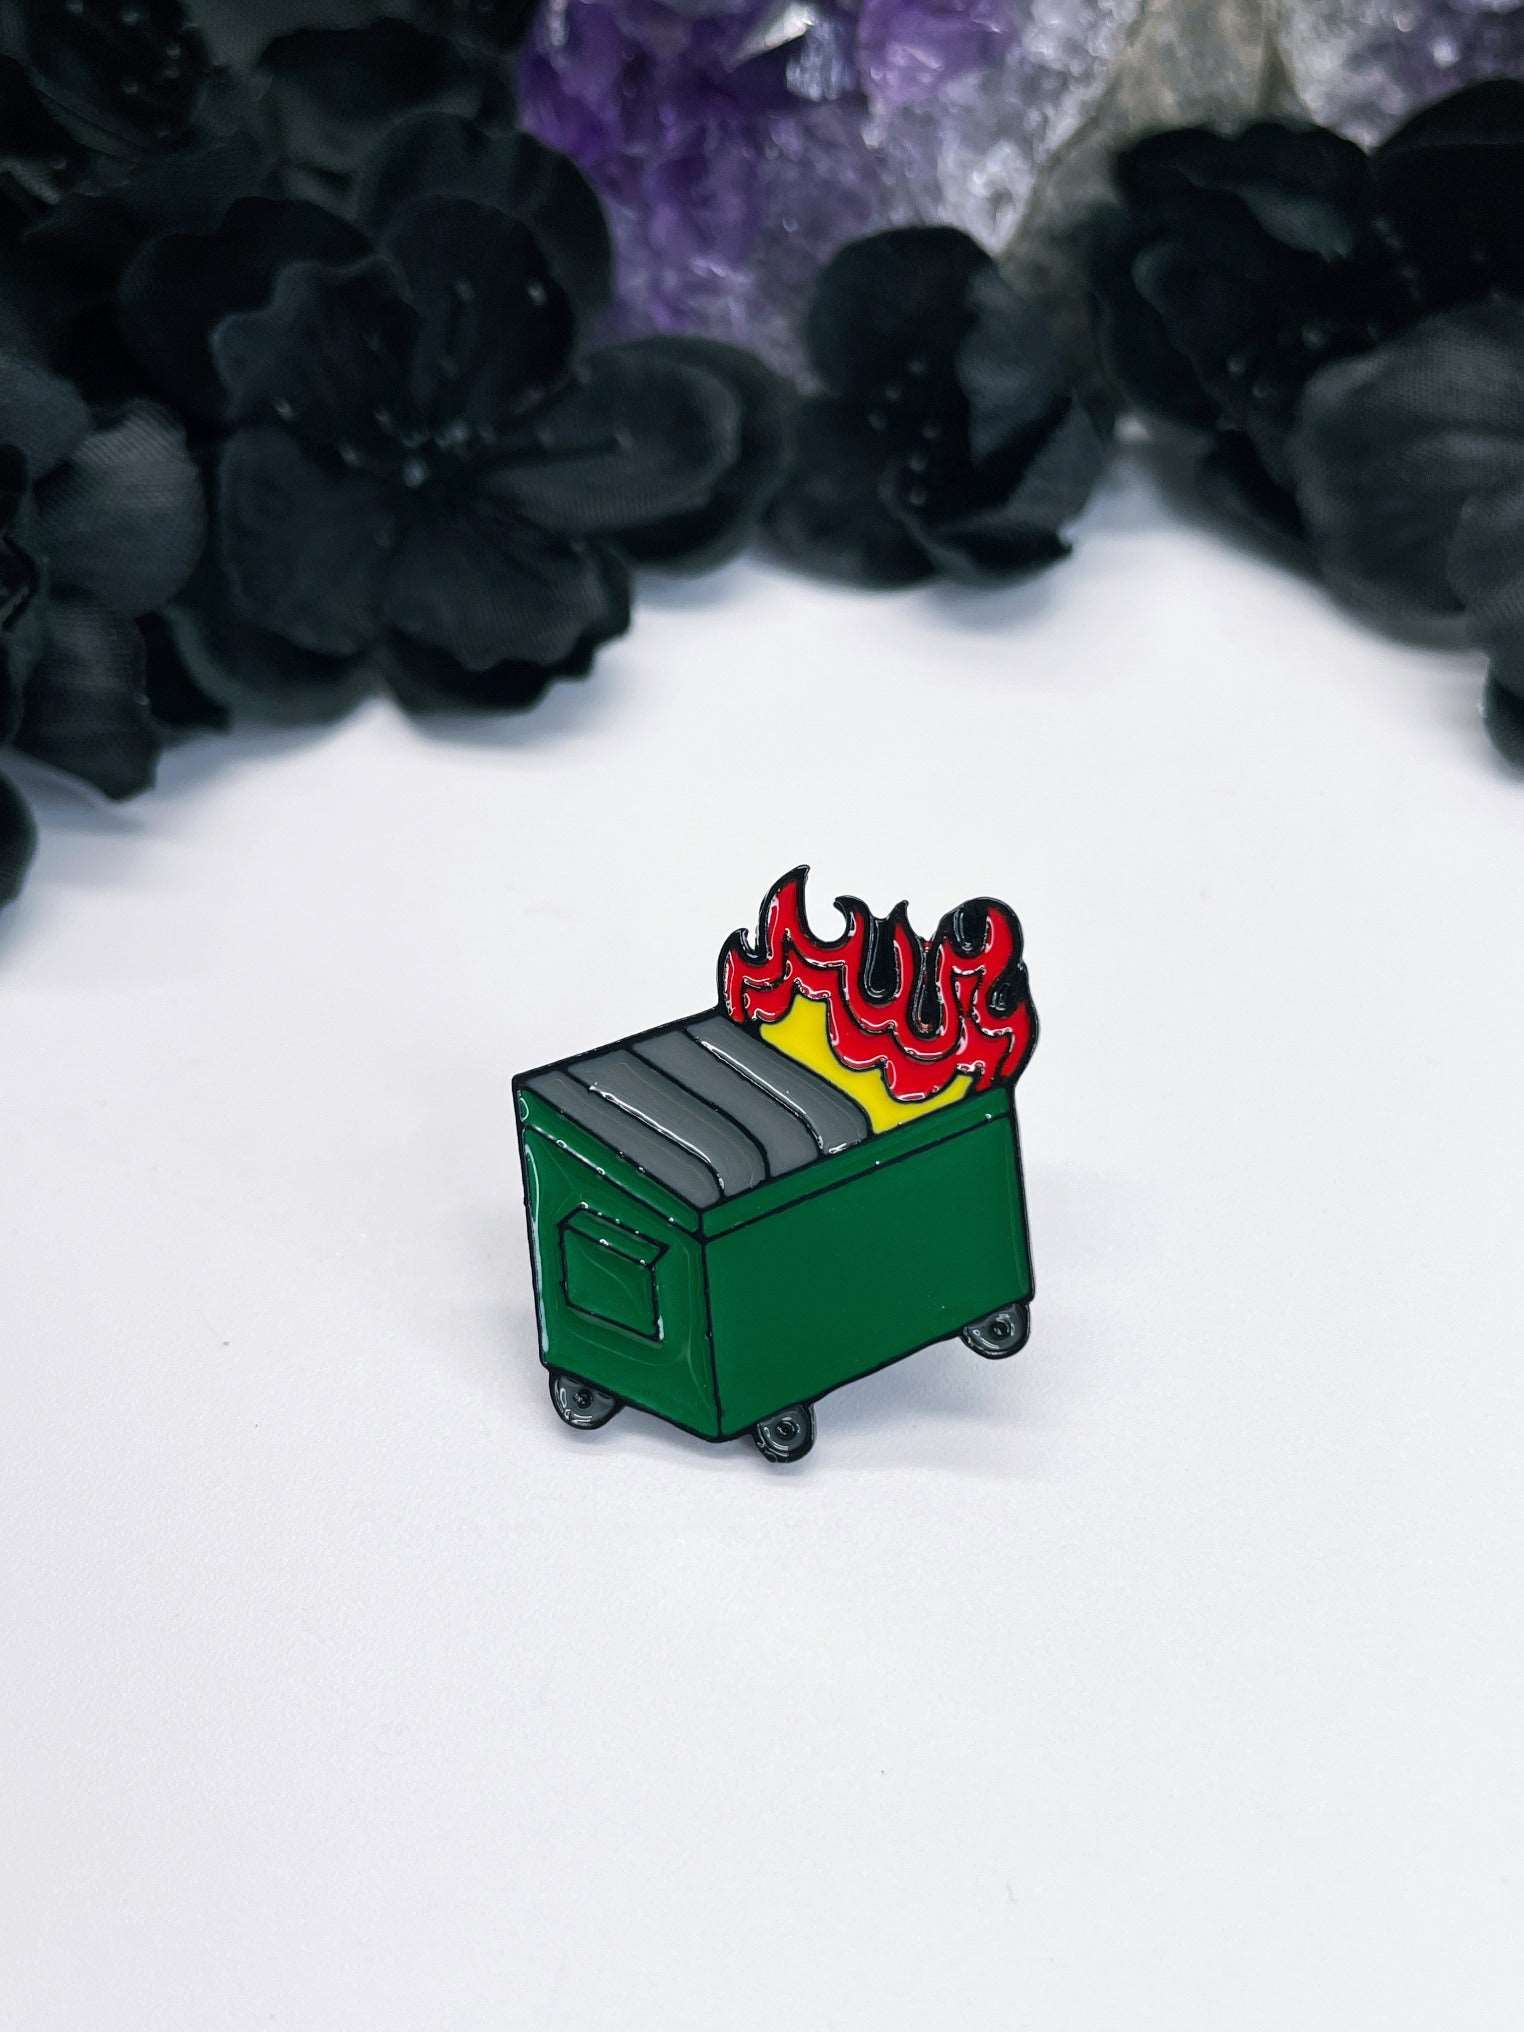 Pictured is an enamel pin of a dumpster fire.